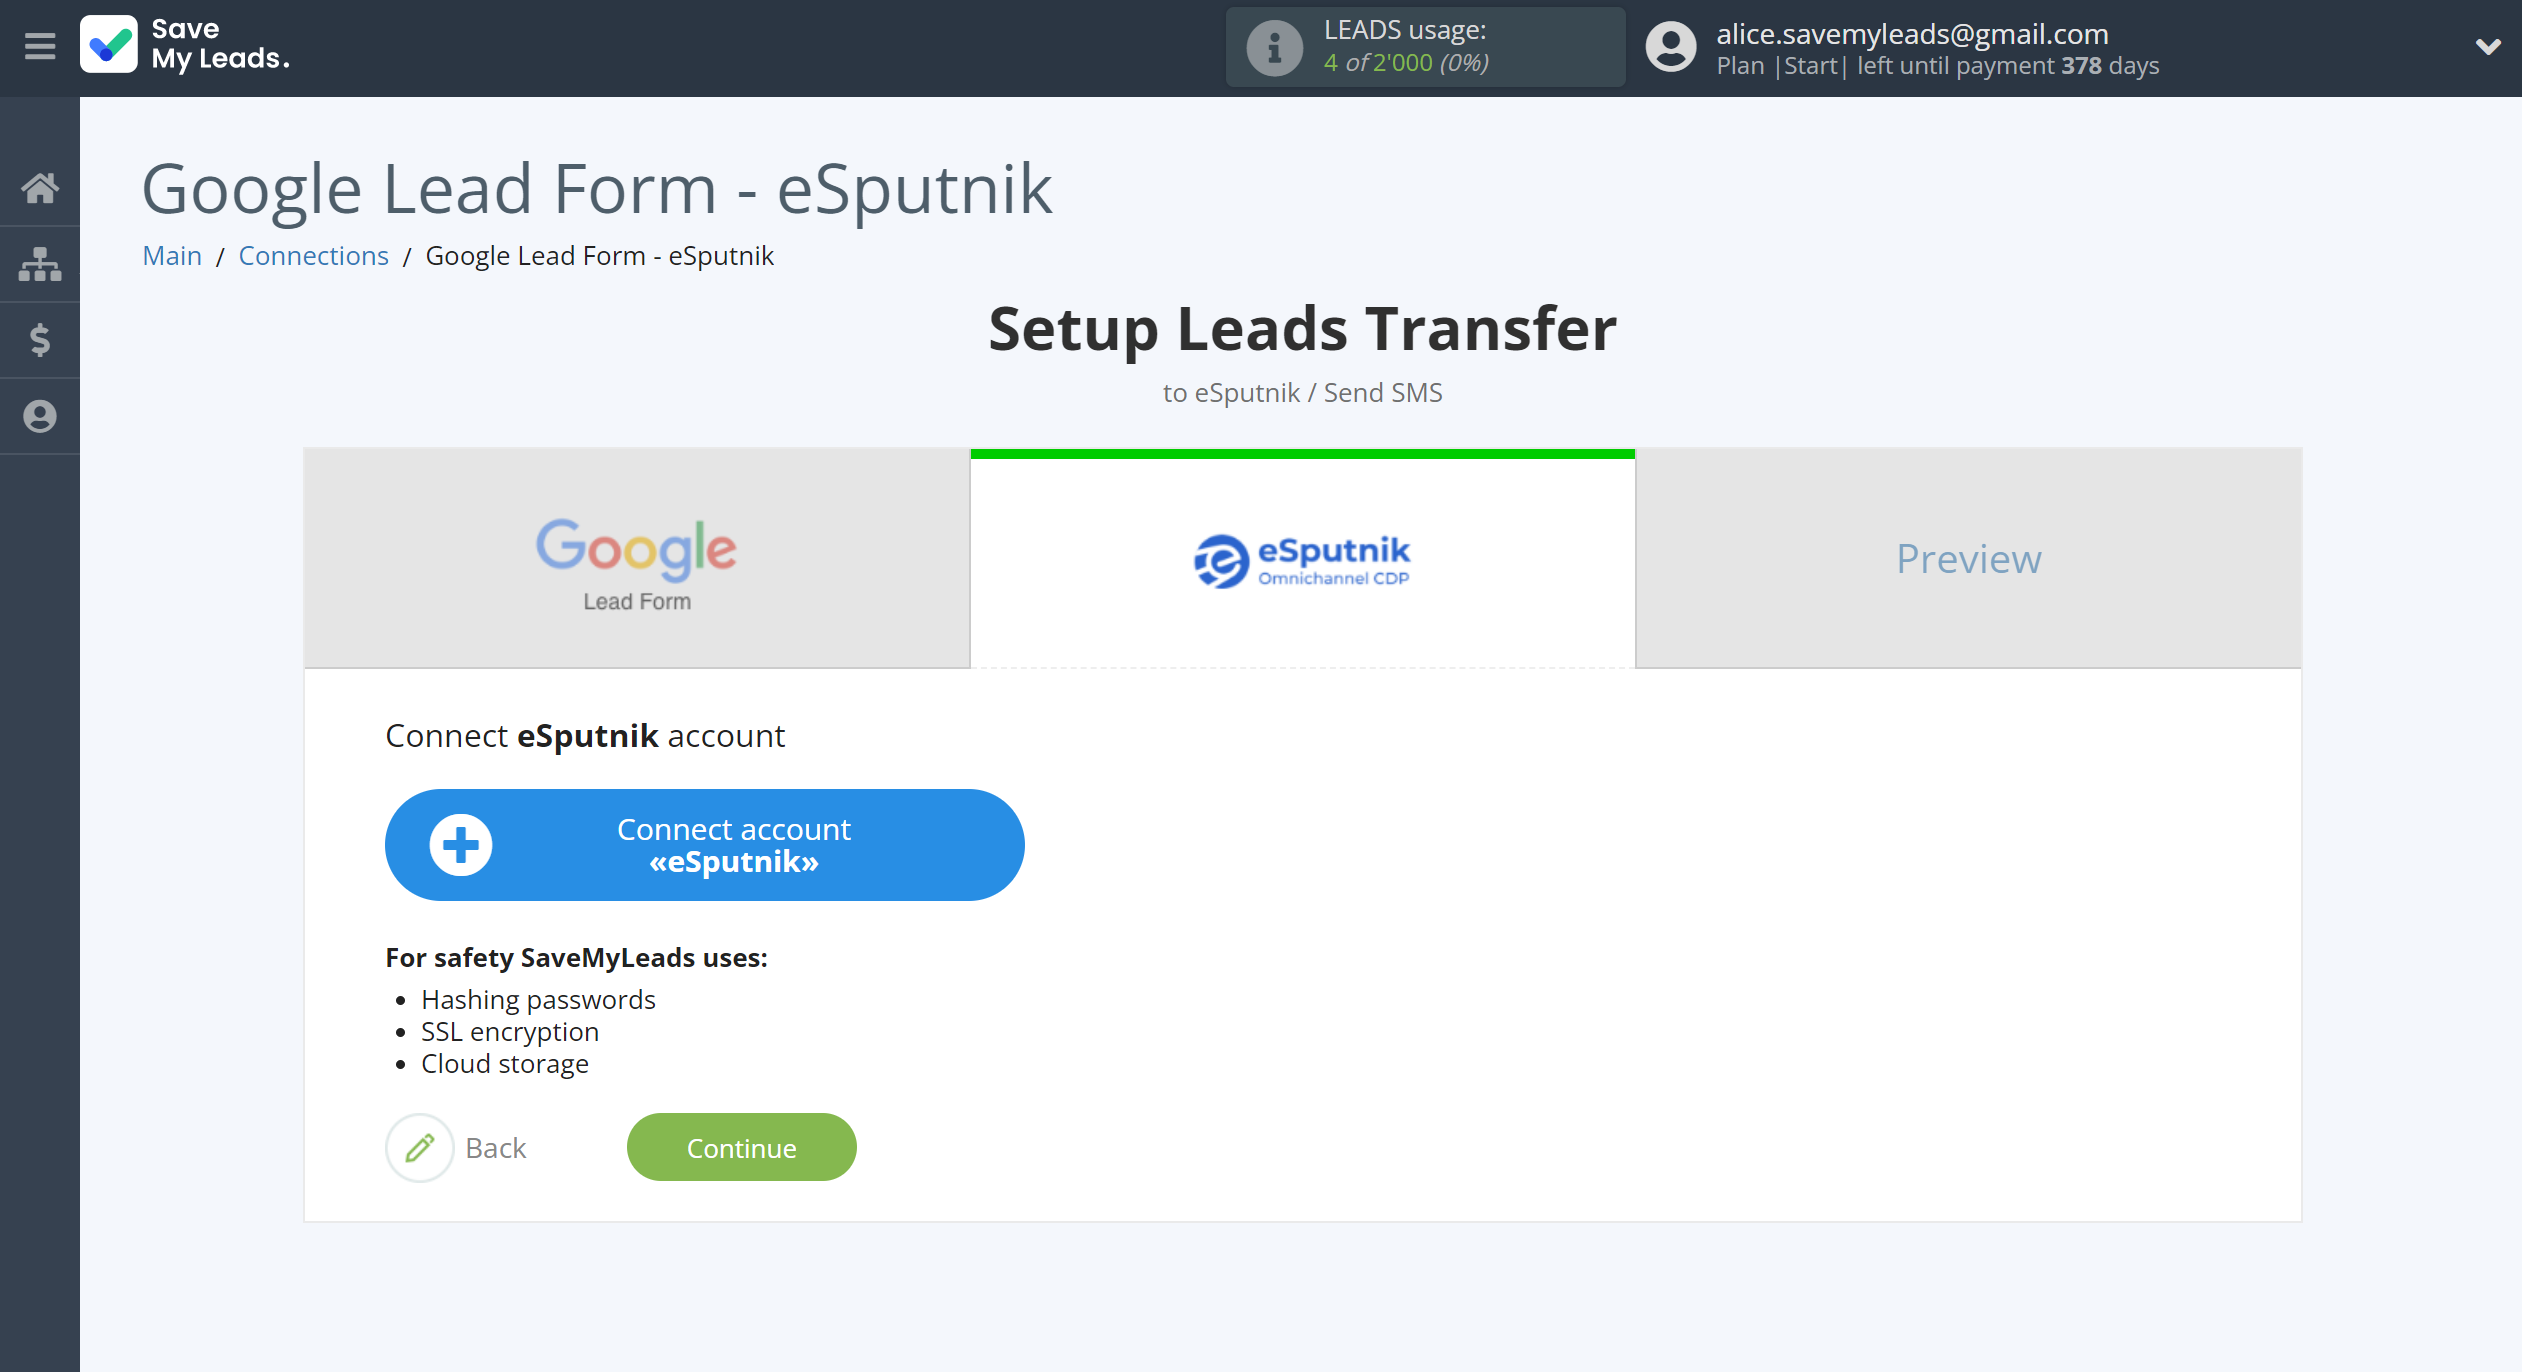 How to Connect Google Lead Form with eSputnik Send SMS | Data Destination account connection